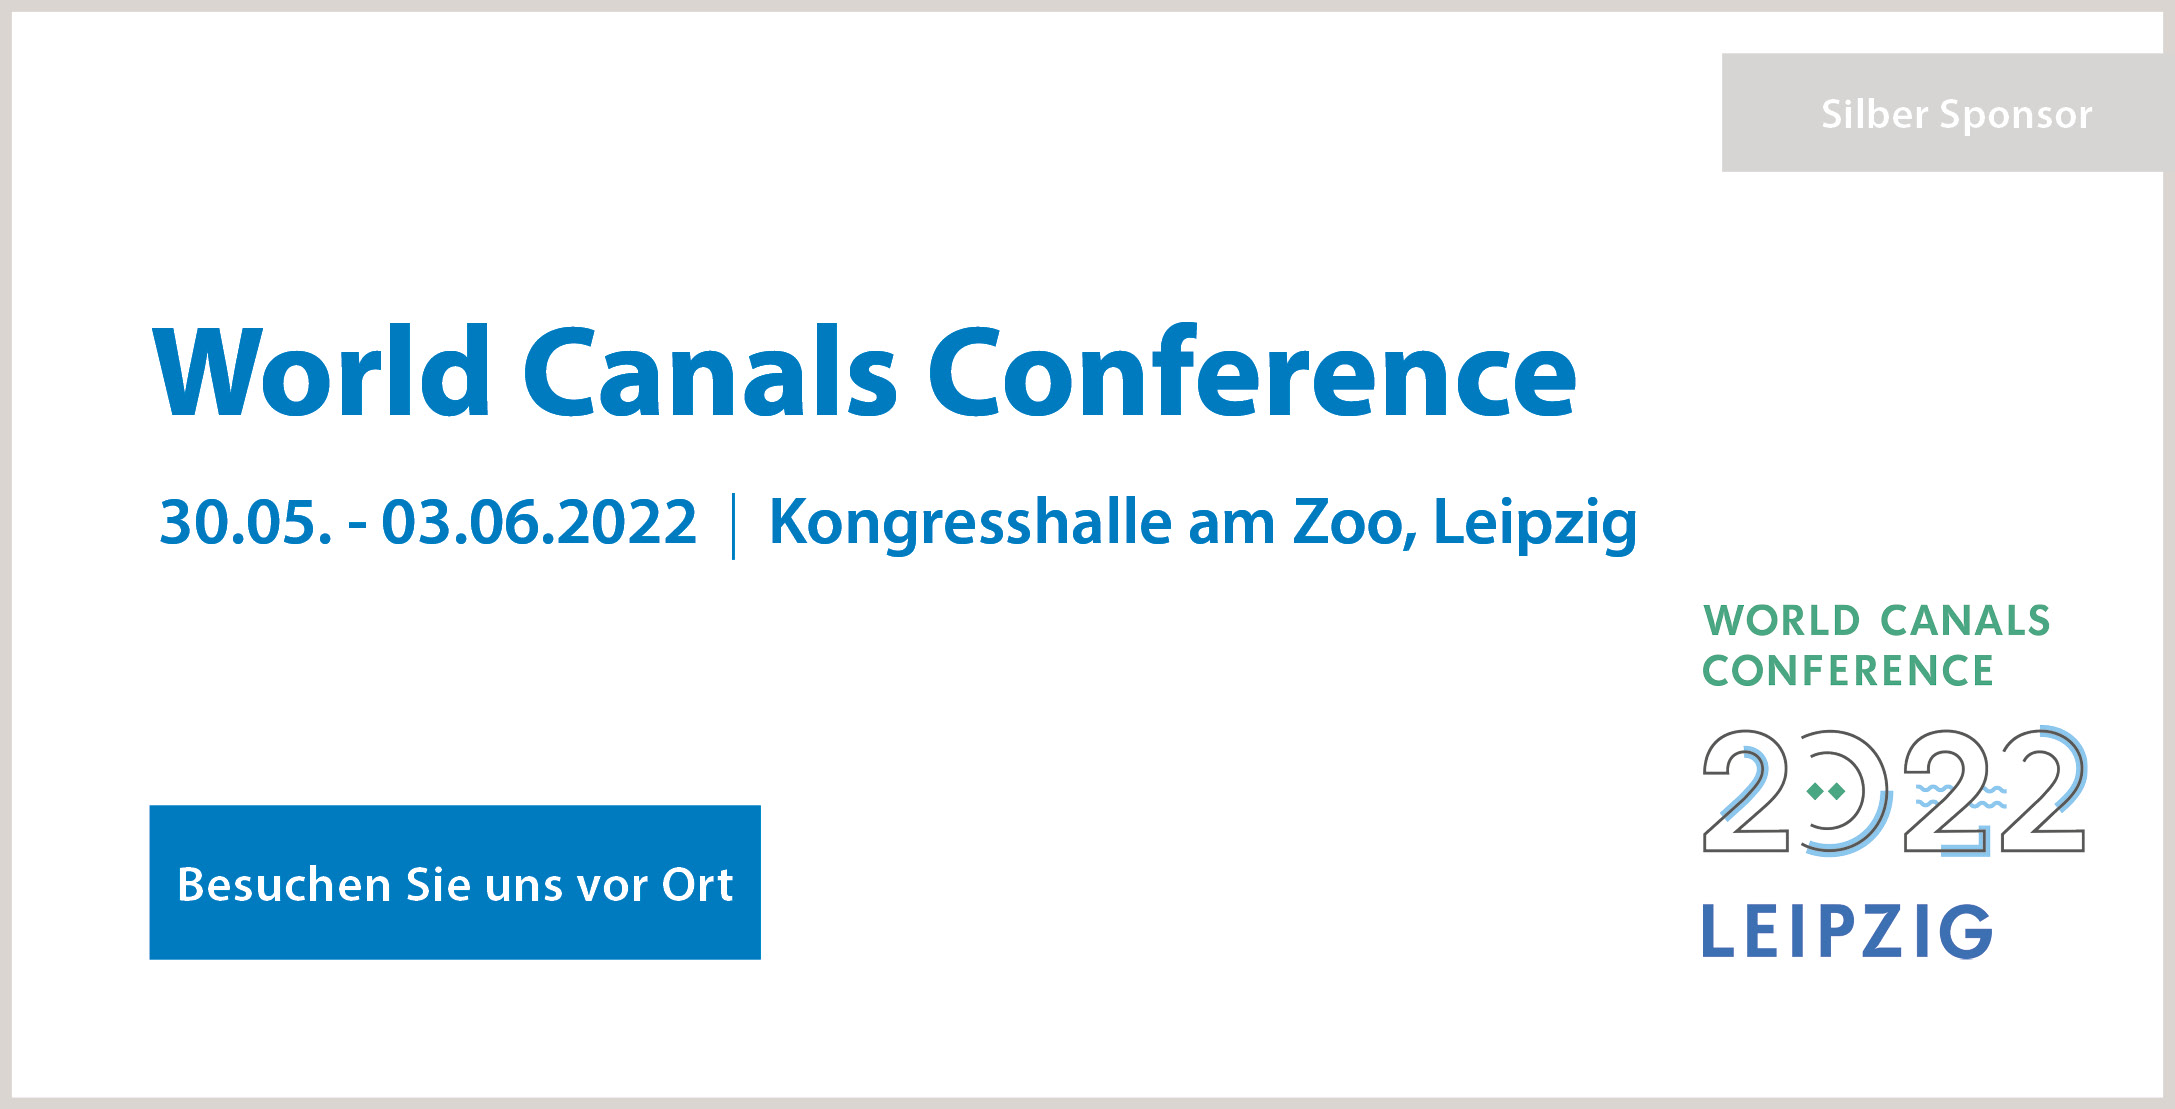 World Canals Conference 2022